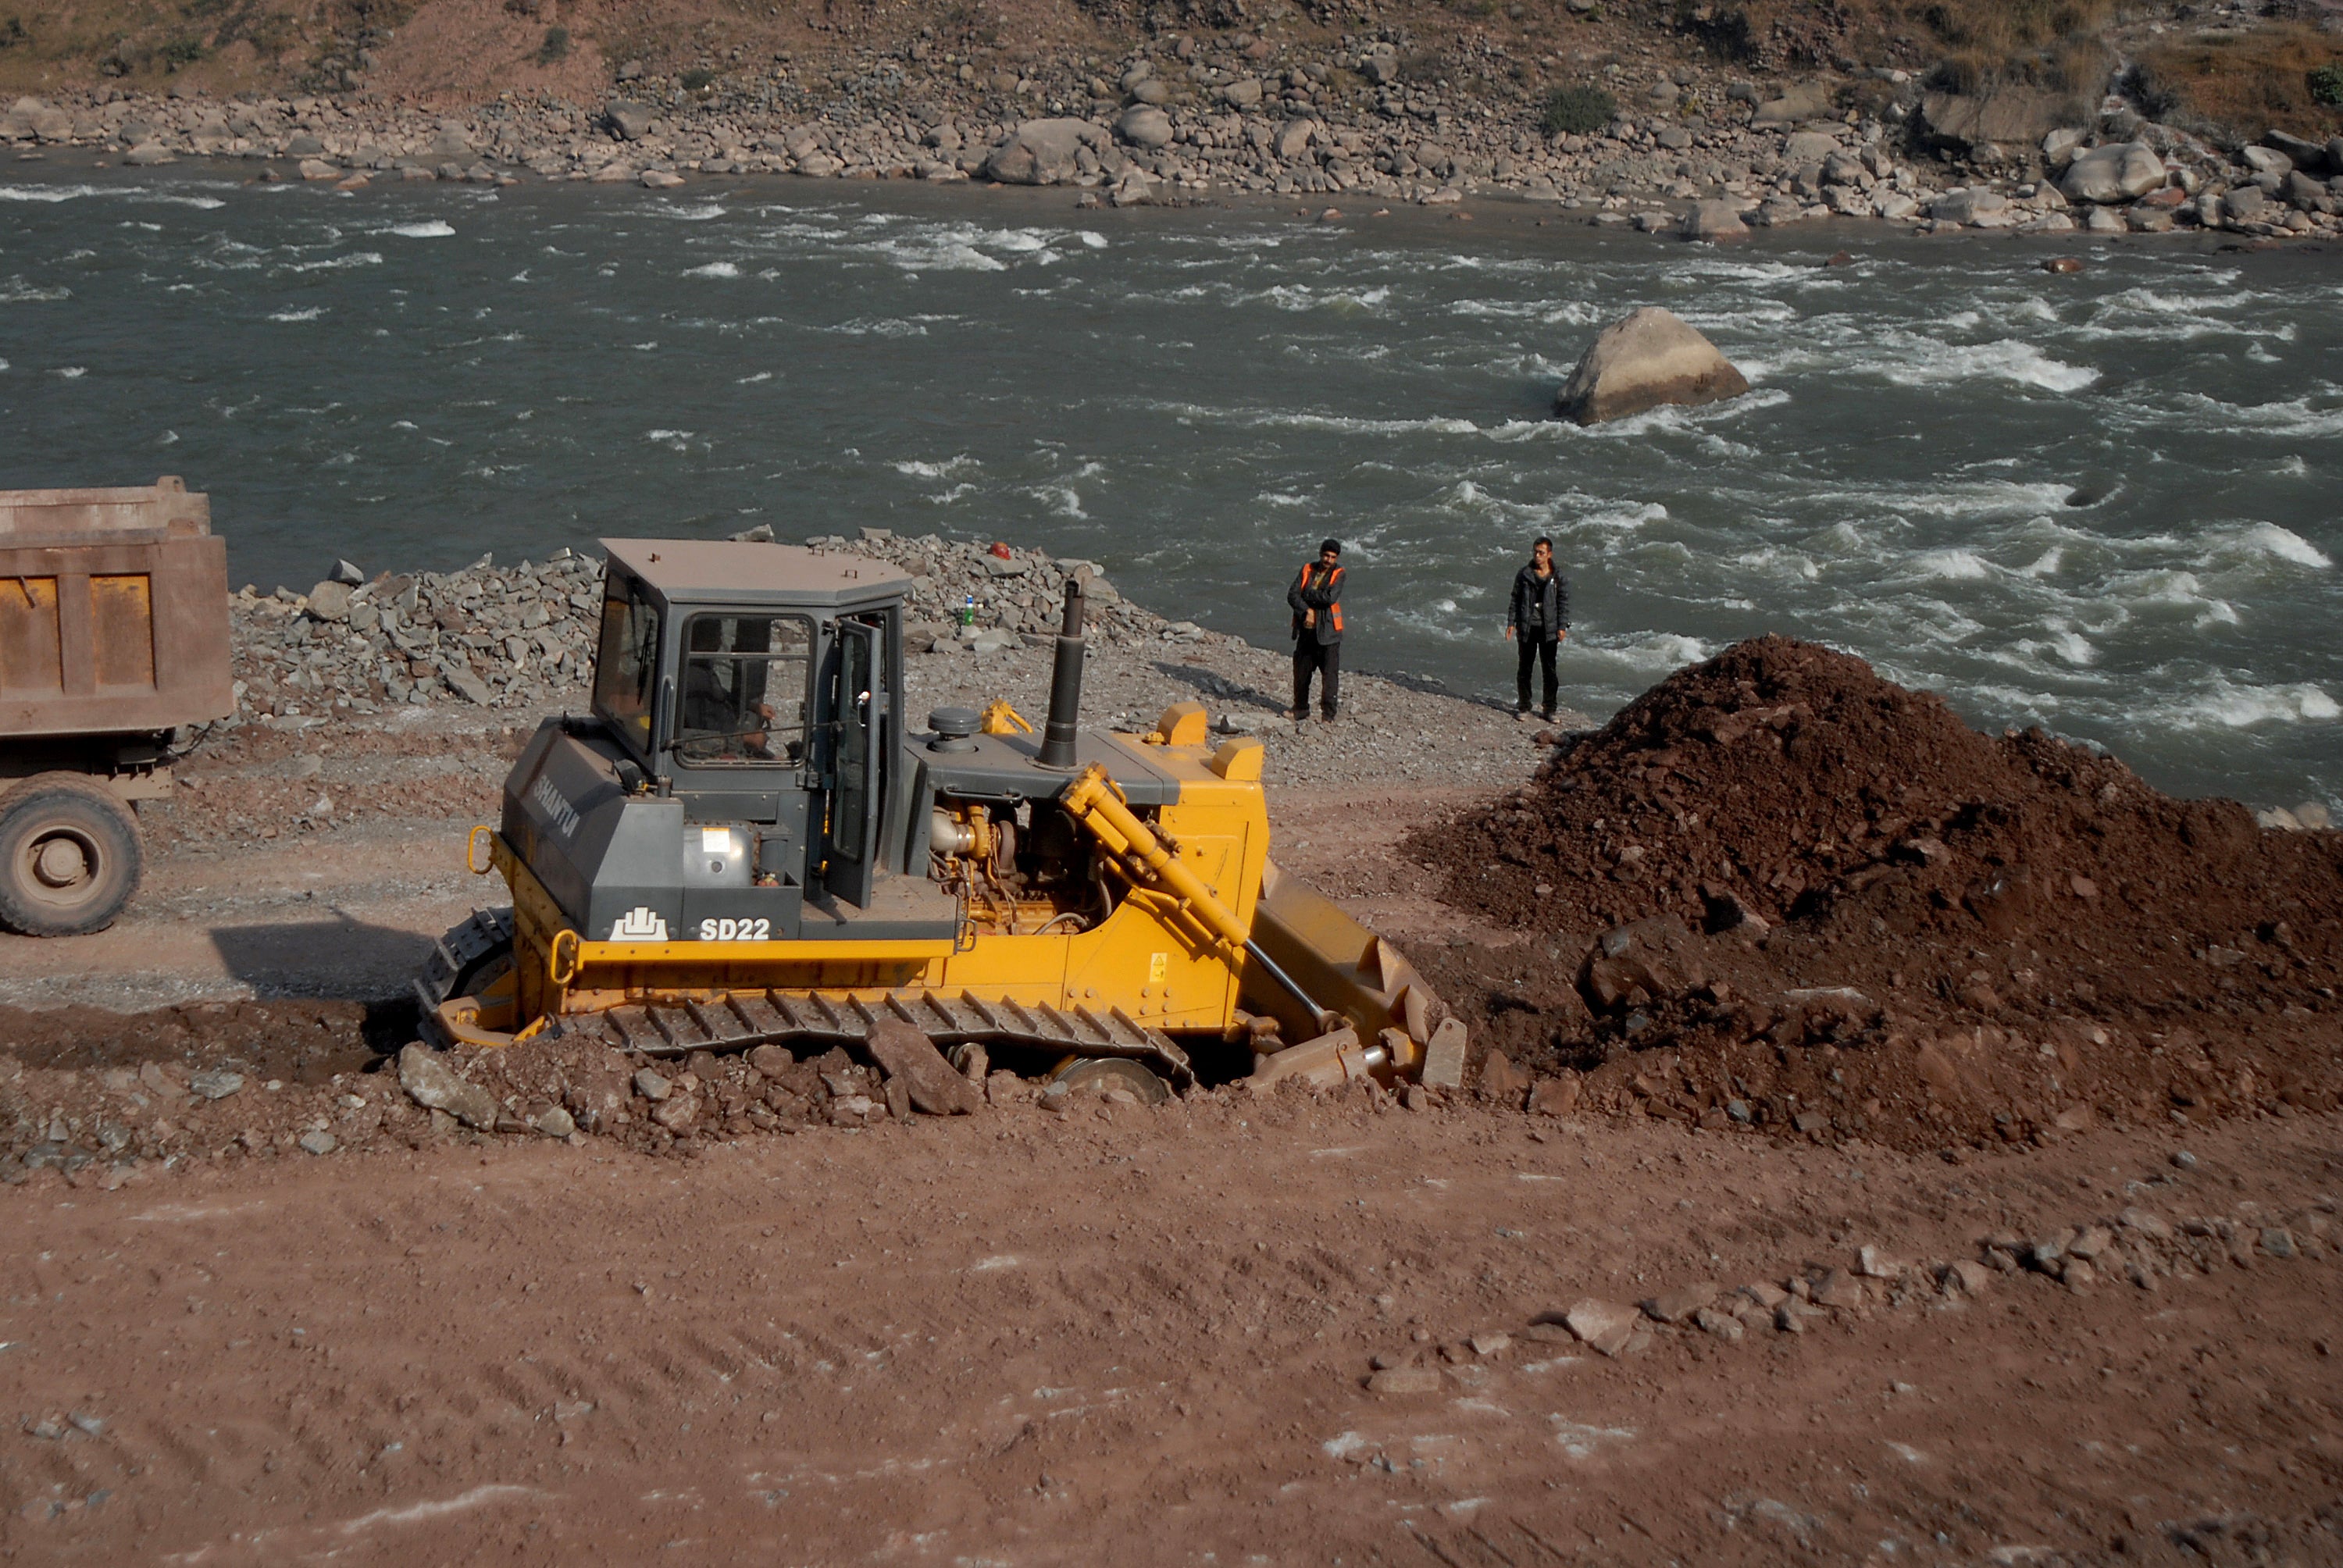 File A Chinese engineer (R) supervise workers preparing a road along a river in Ghari Dopatta, some 22 kms from Muzaffarabad, the capital of Pakistani-administered Kashmir in 2013